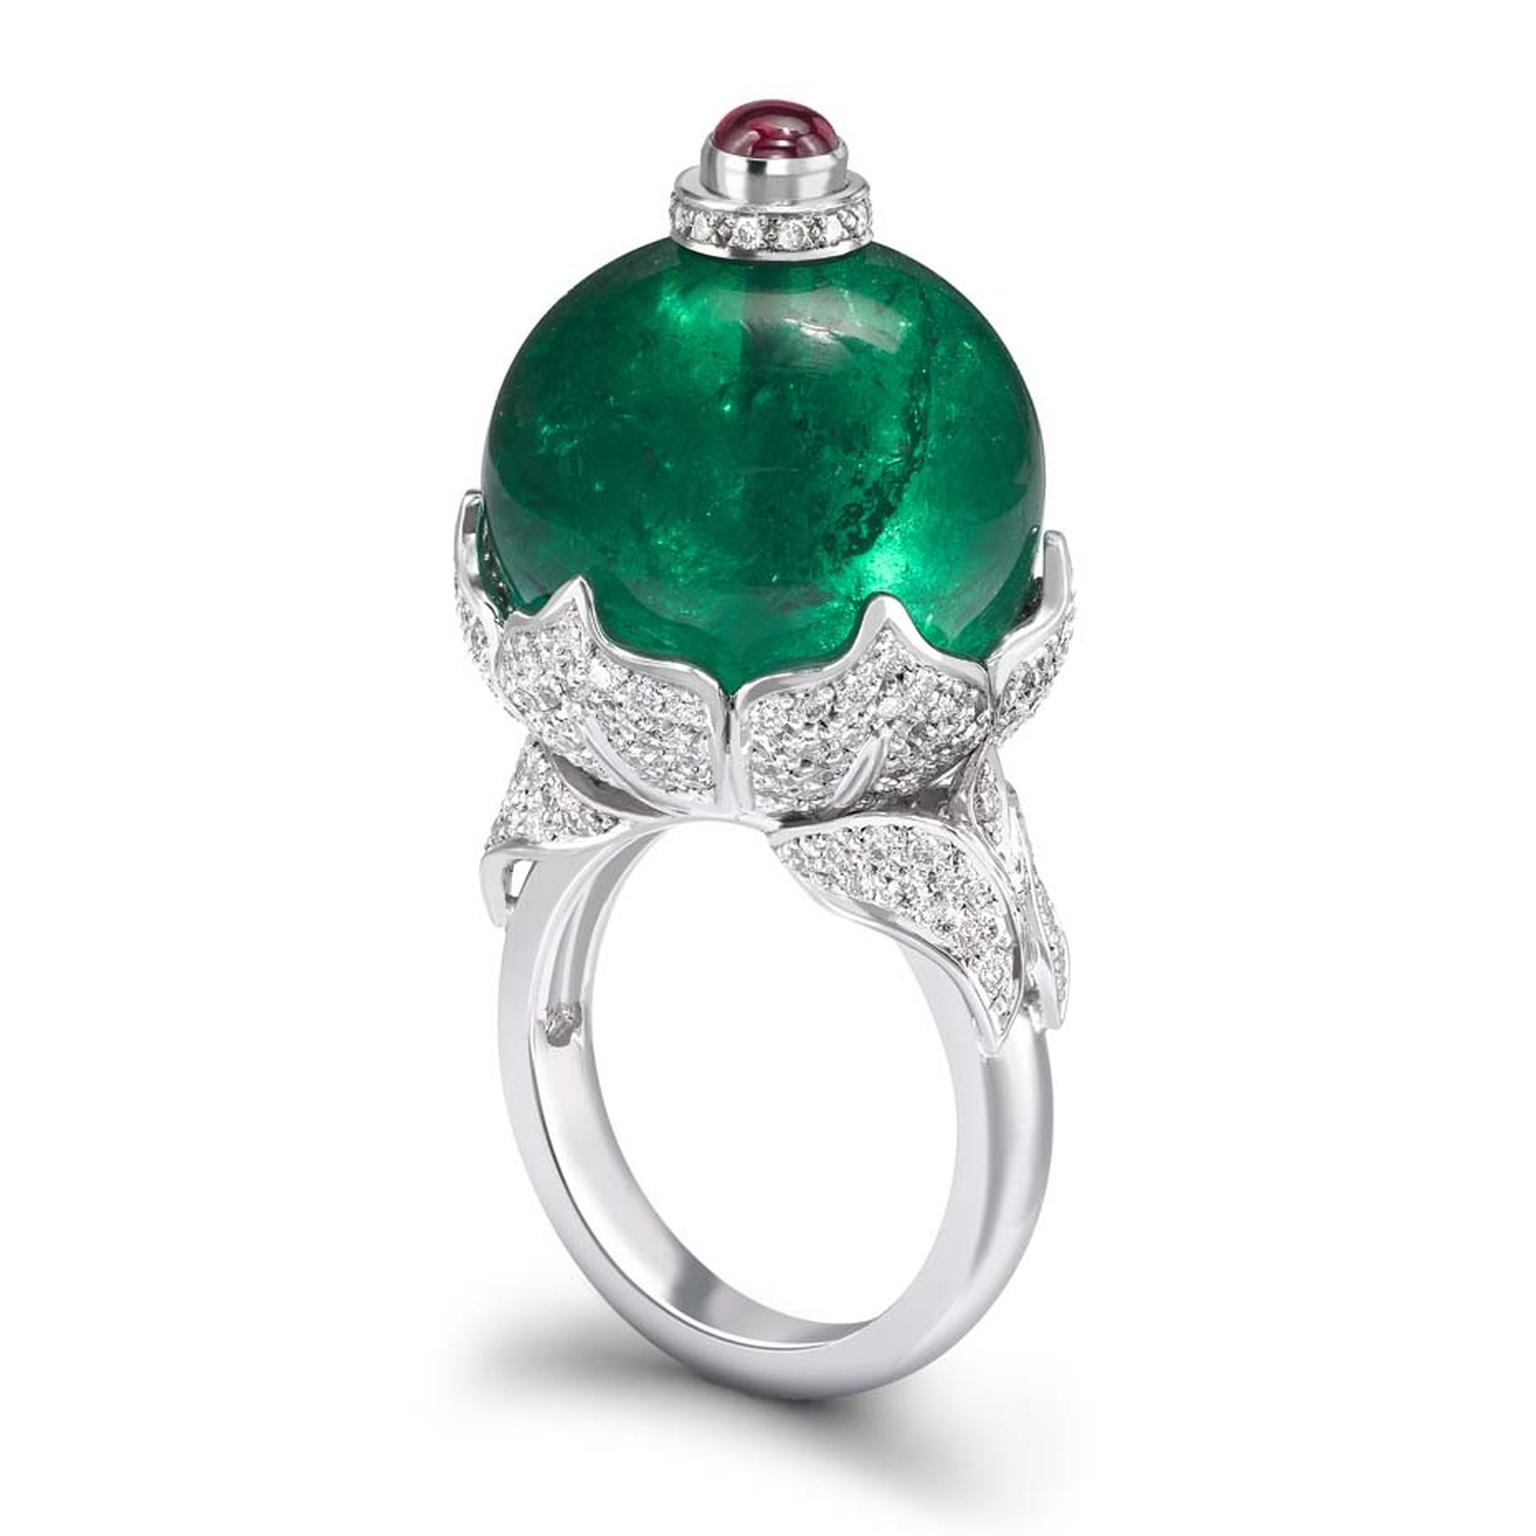 Theo Fennell white gold ring Theo Fennell white gold ring with a Gemfields emerald bead (38.70ct) surrounded by pavé diamonds and topped with a ruby. a Gemfields Emerald bead (38.70ct) surrounded by pavé diamonds and topped with a ruby.